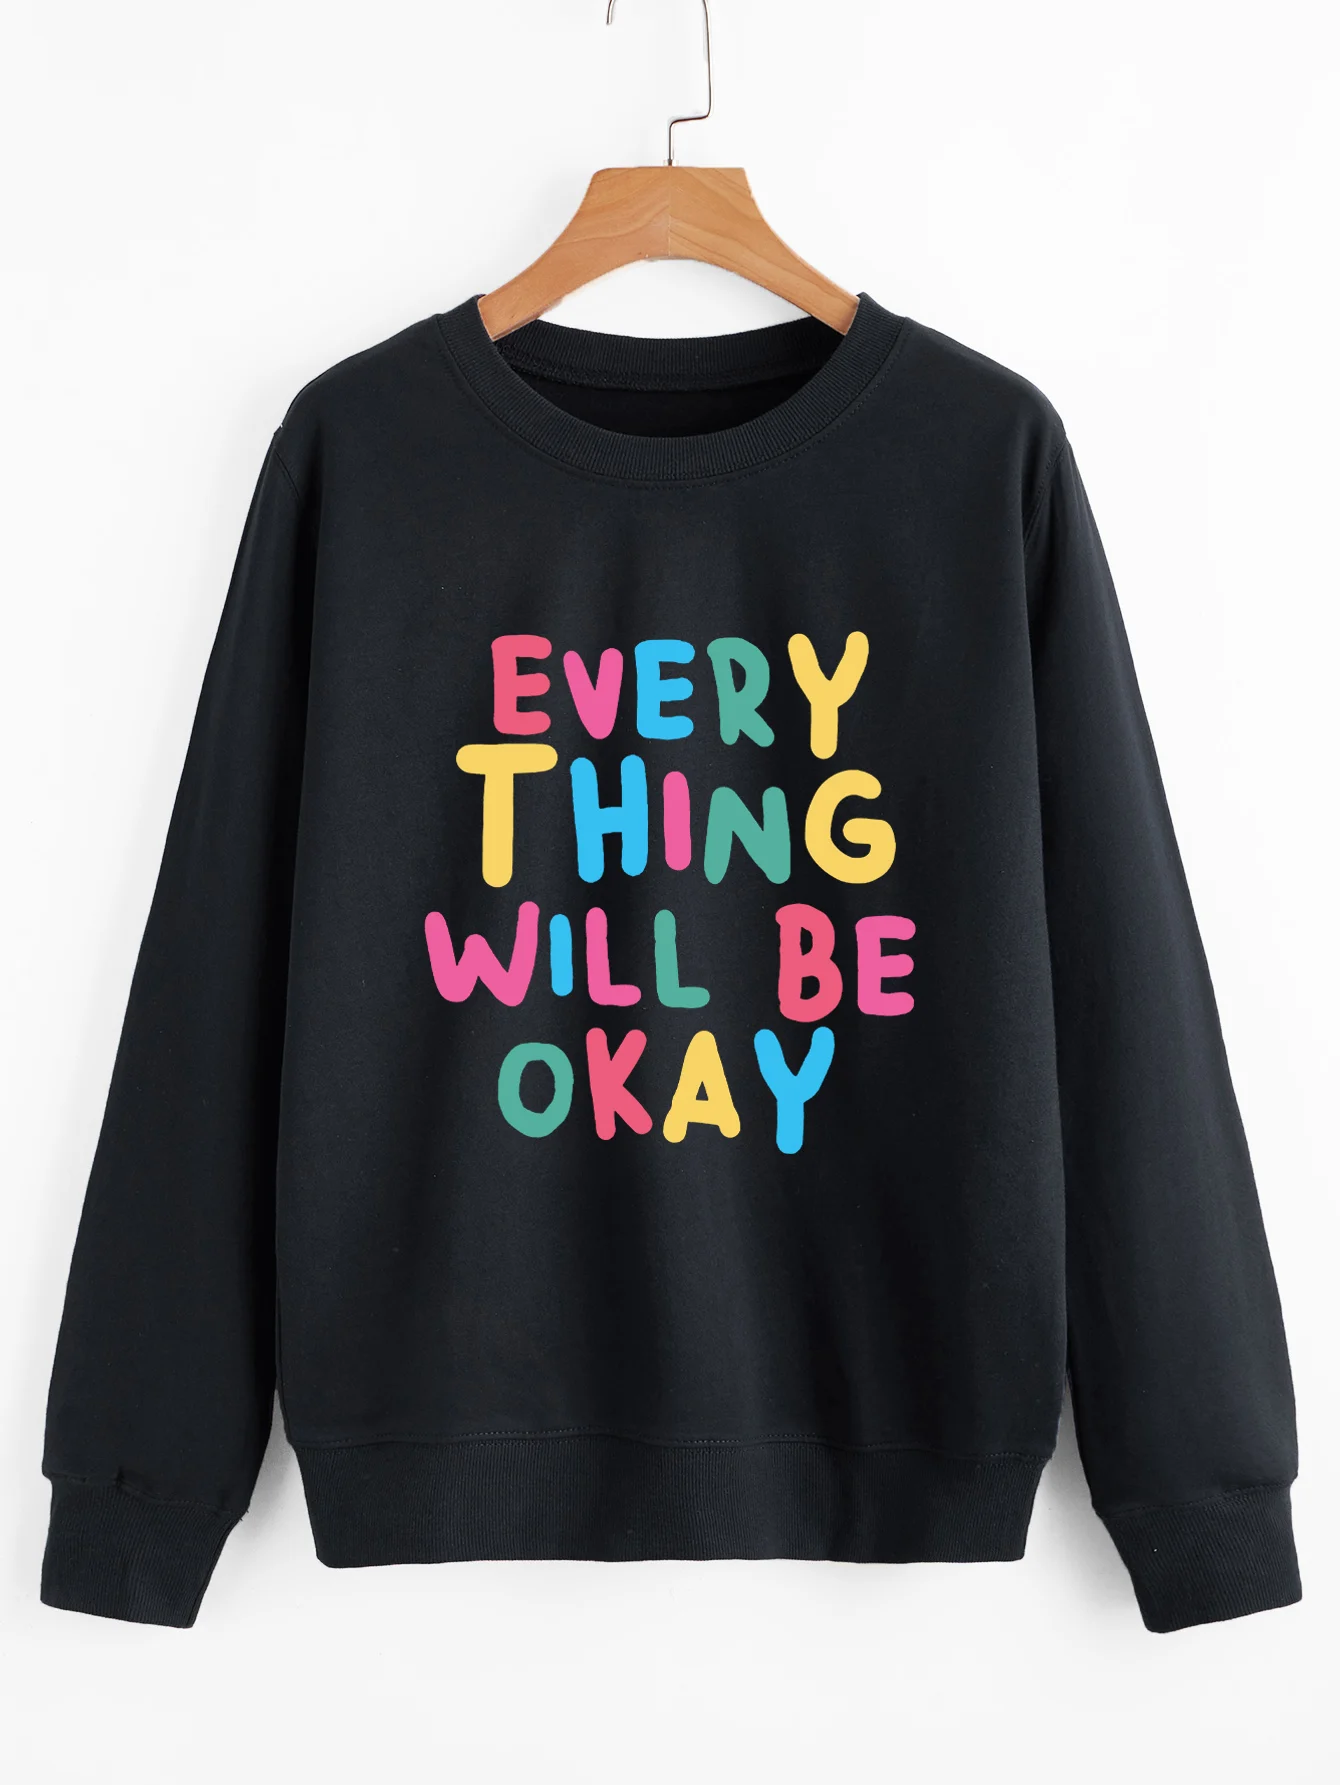 

Women EVERTHING WILL BE OKAY Letters Print Sweatshirts Trendy Positive Sayings Pullover Fashion Hoodies Casual Vintage Tops